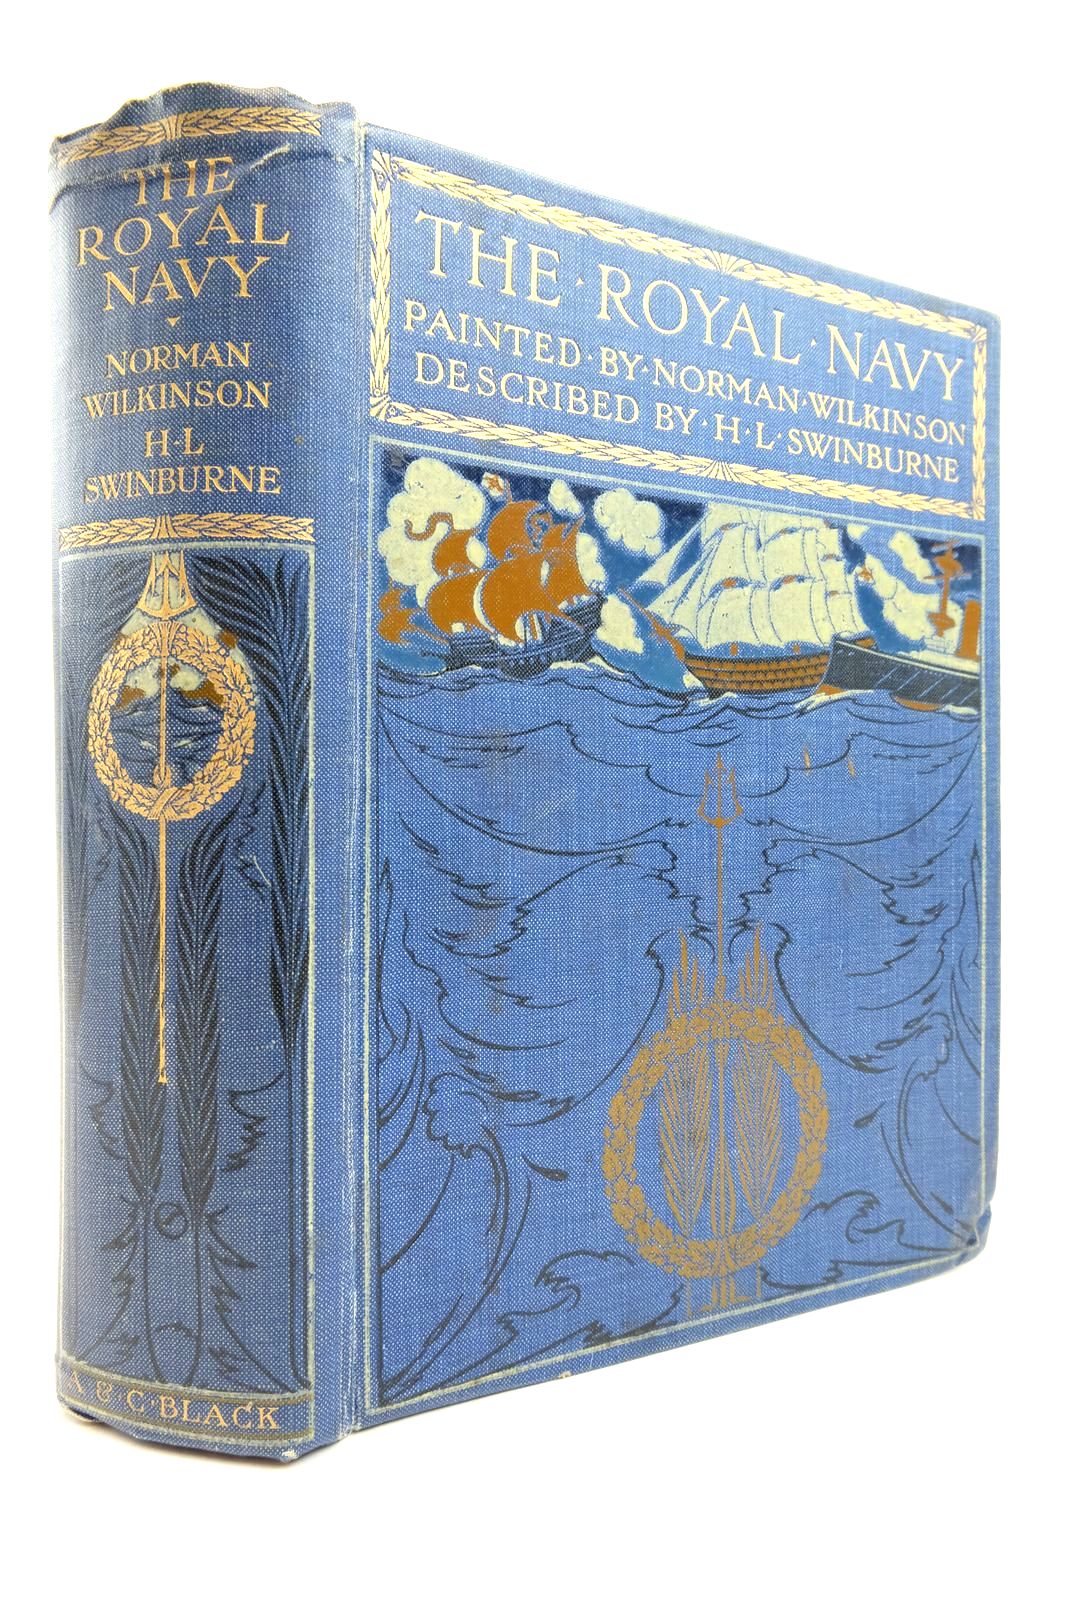 Photo of THE ROYAL NAVY written by Swinburne, H. Lawrence illustrated by Wilkinson, Norman Jellicoe, J. published by Adam &amp; Charles Black (STOCK CODE: 2137509)  for sale by Stella & Rose's Books